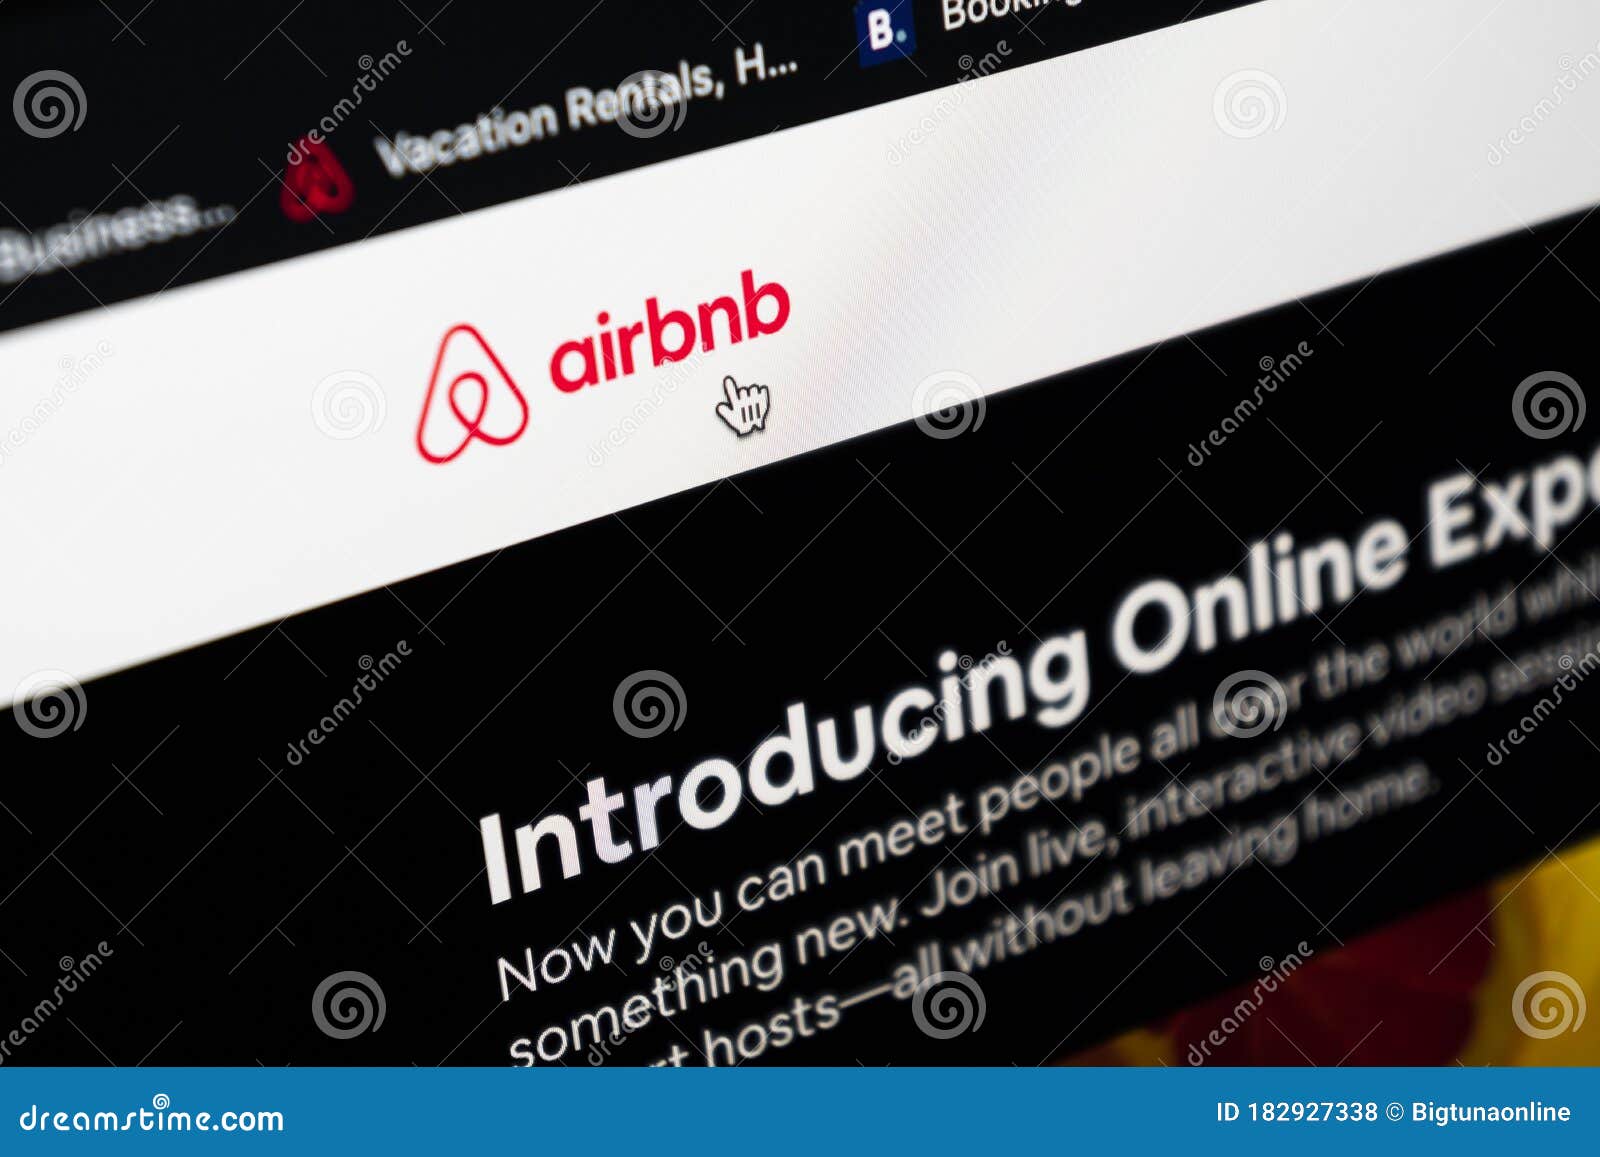 Airbnb Stock Photo - What Is the Airbnb Stock Price ...